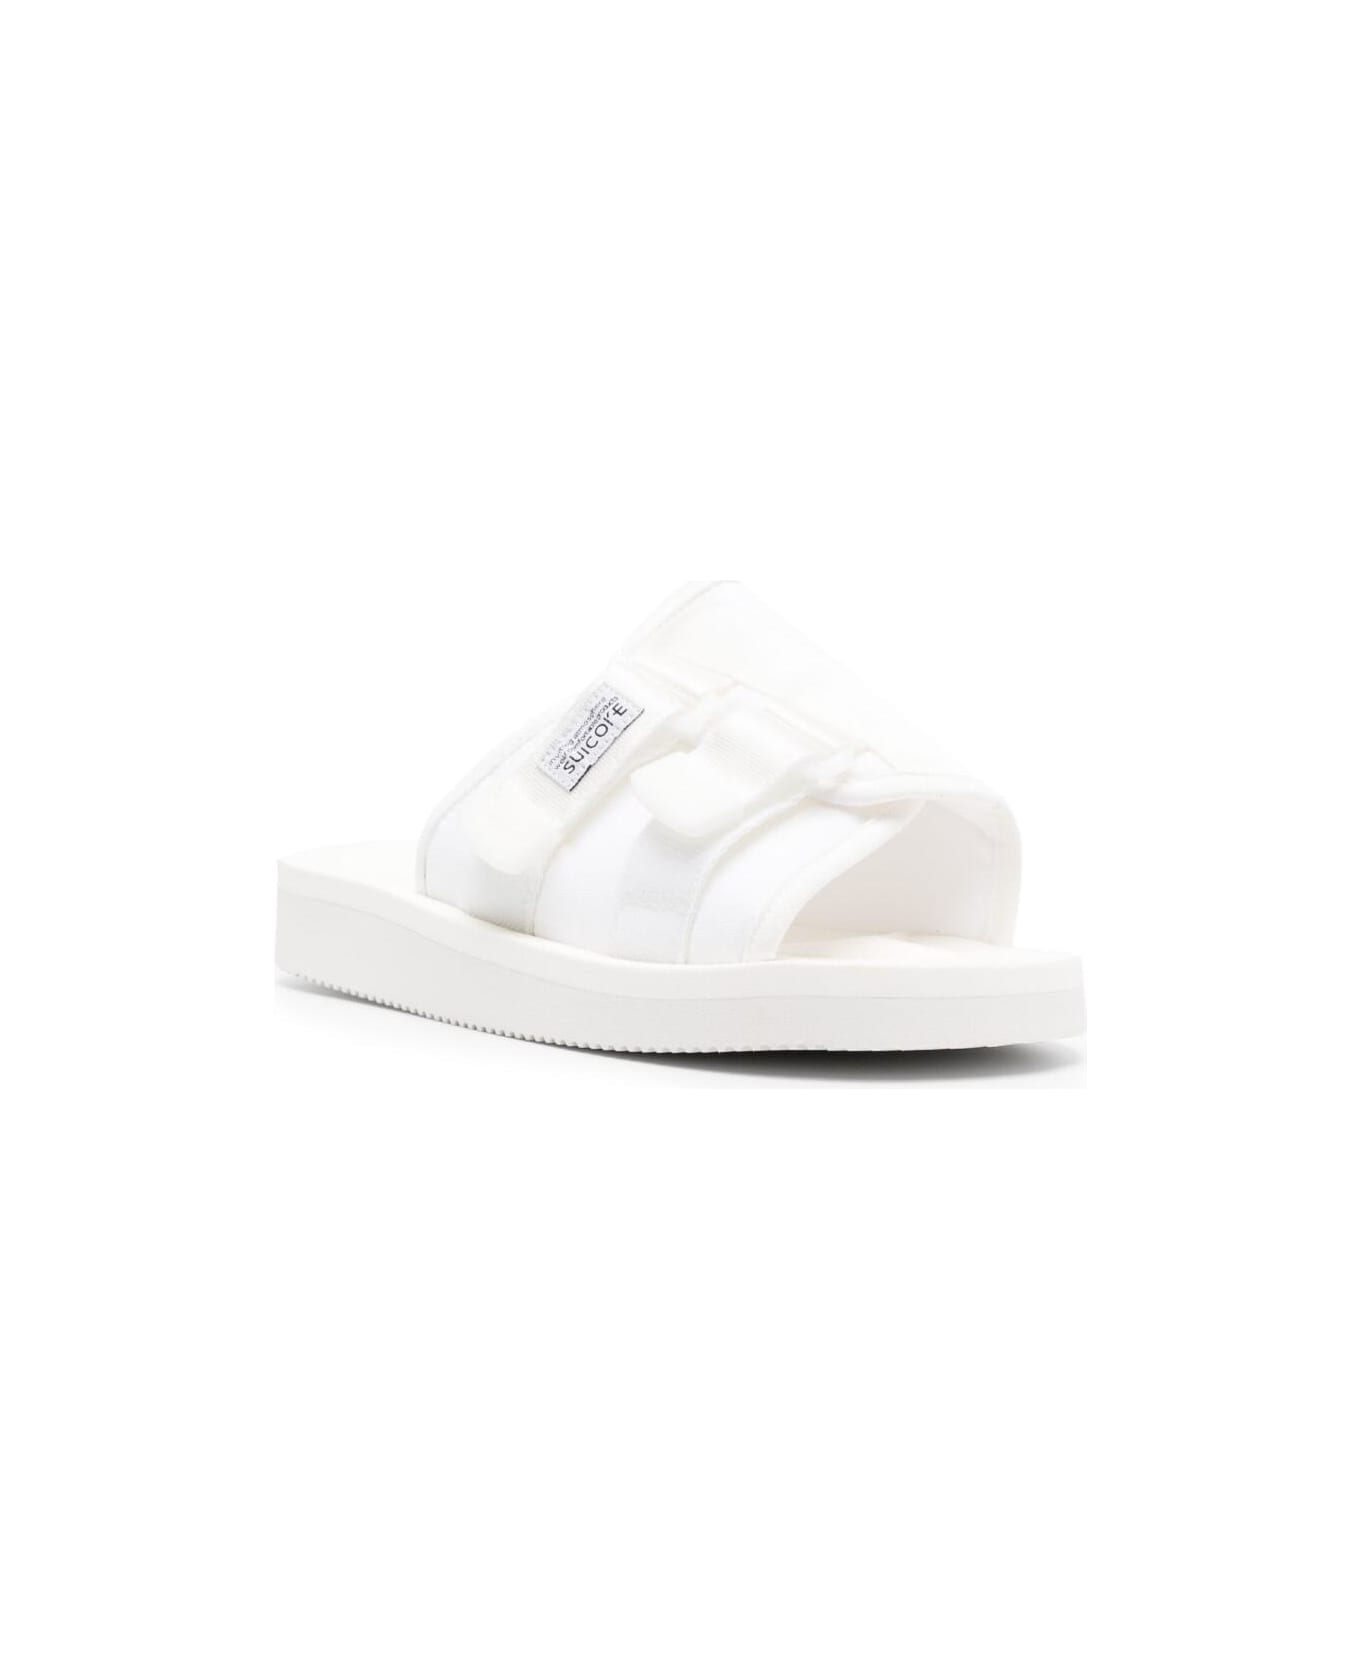 SUICOKE 'kaw-cab' White Sandals With Velcro Fastening In Nylon Man Suicoke - White